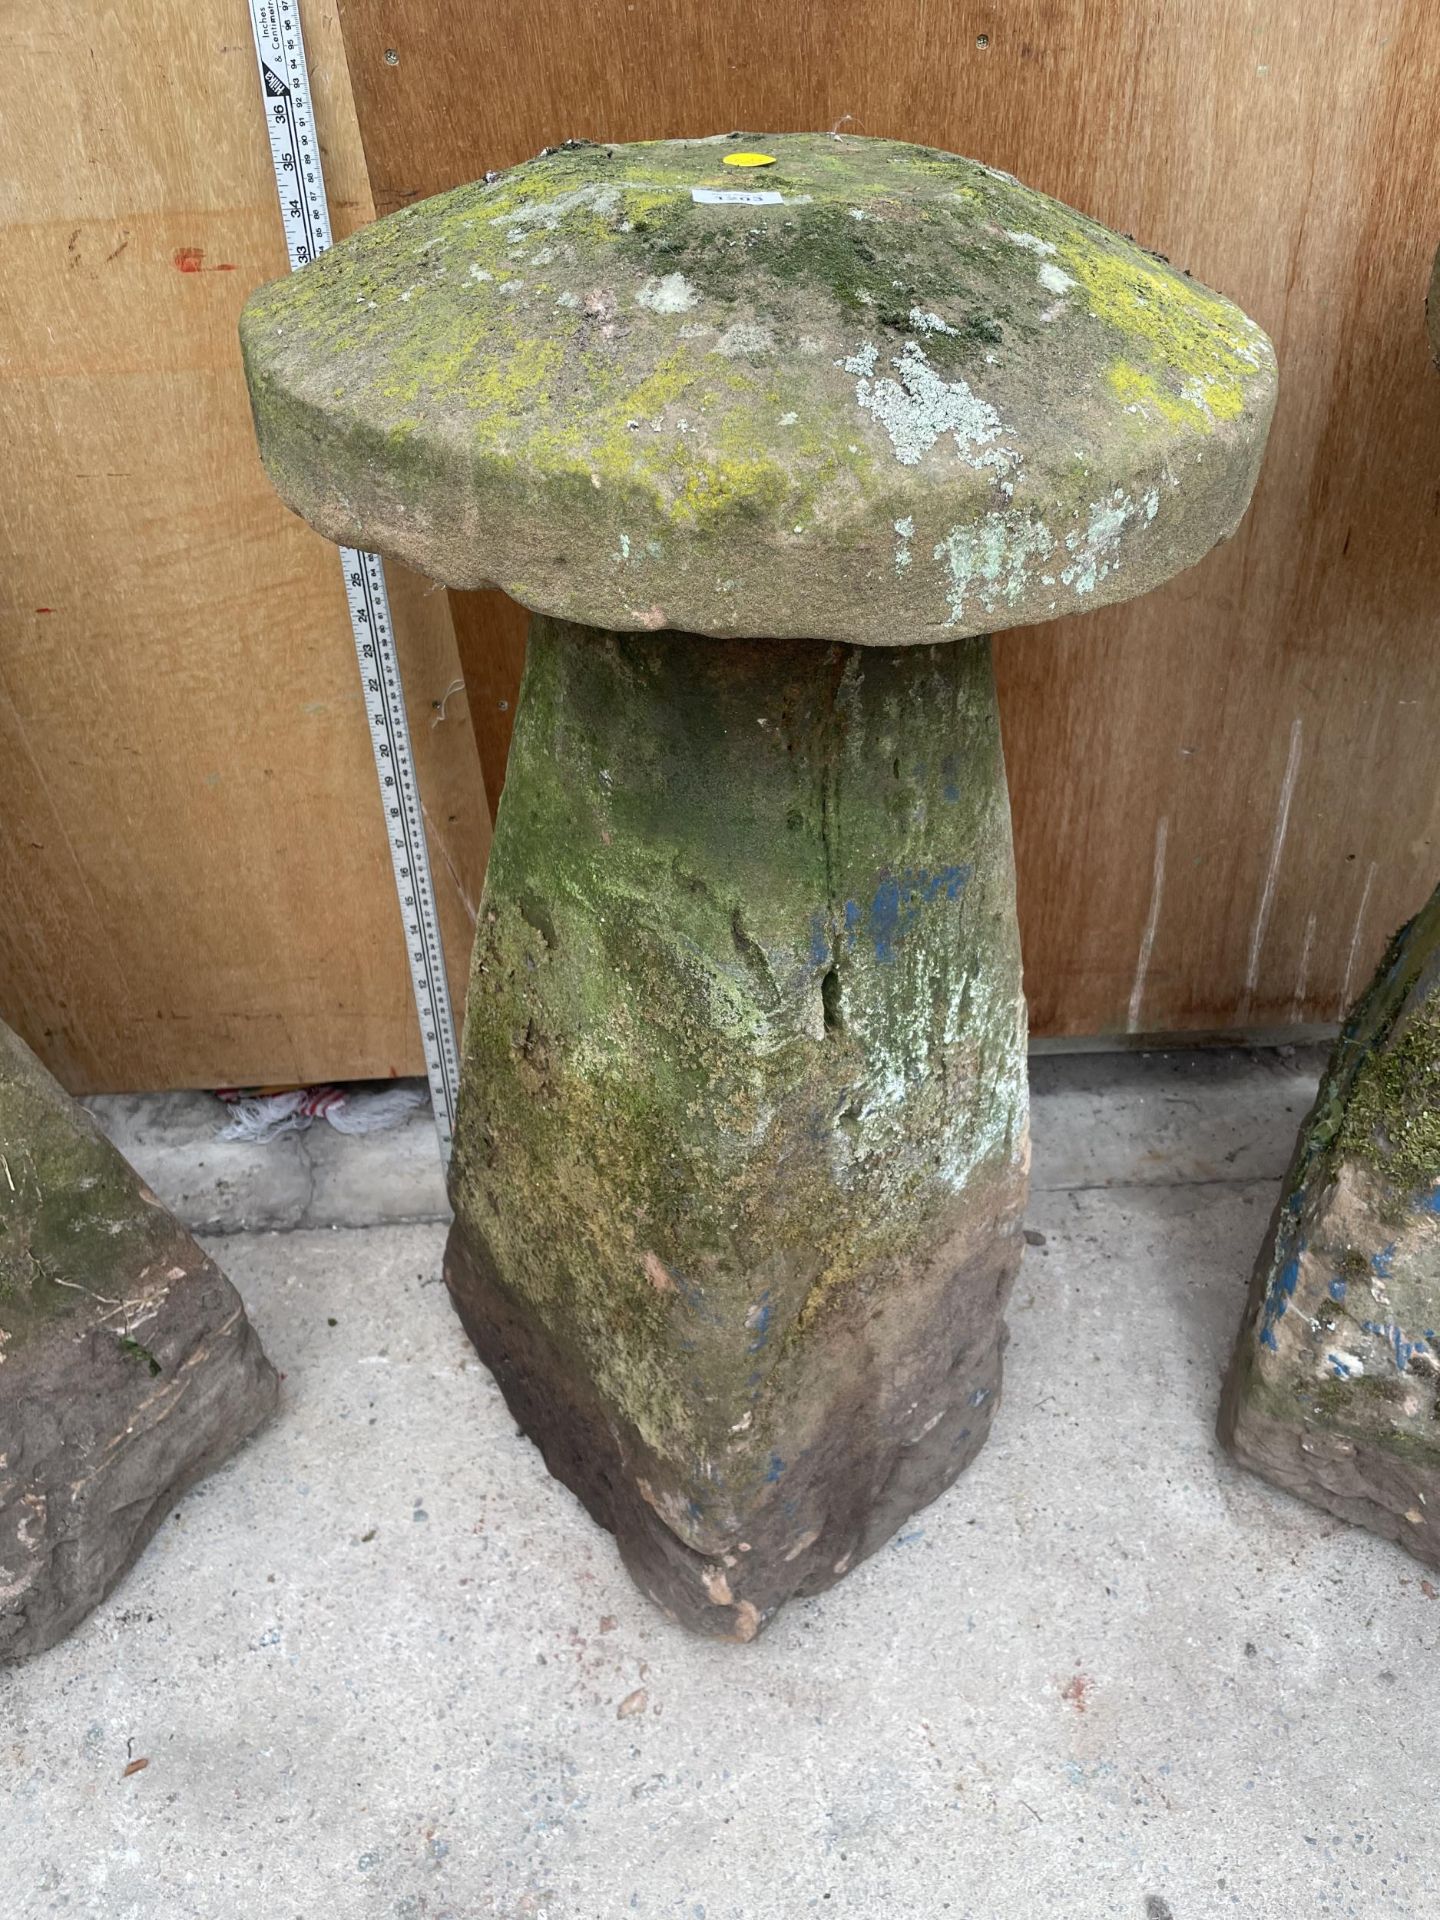 A LARGE STONE STADDLE STONE - APPROXIMATELY 85 CM HIGH